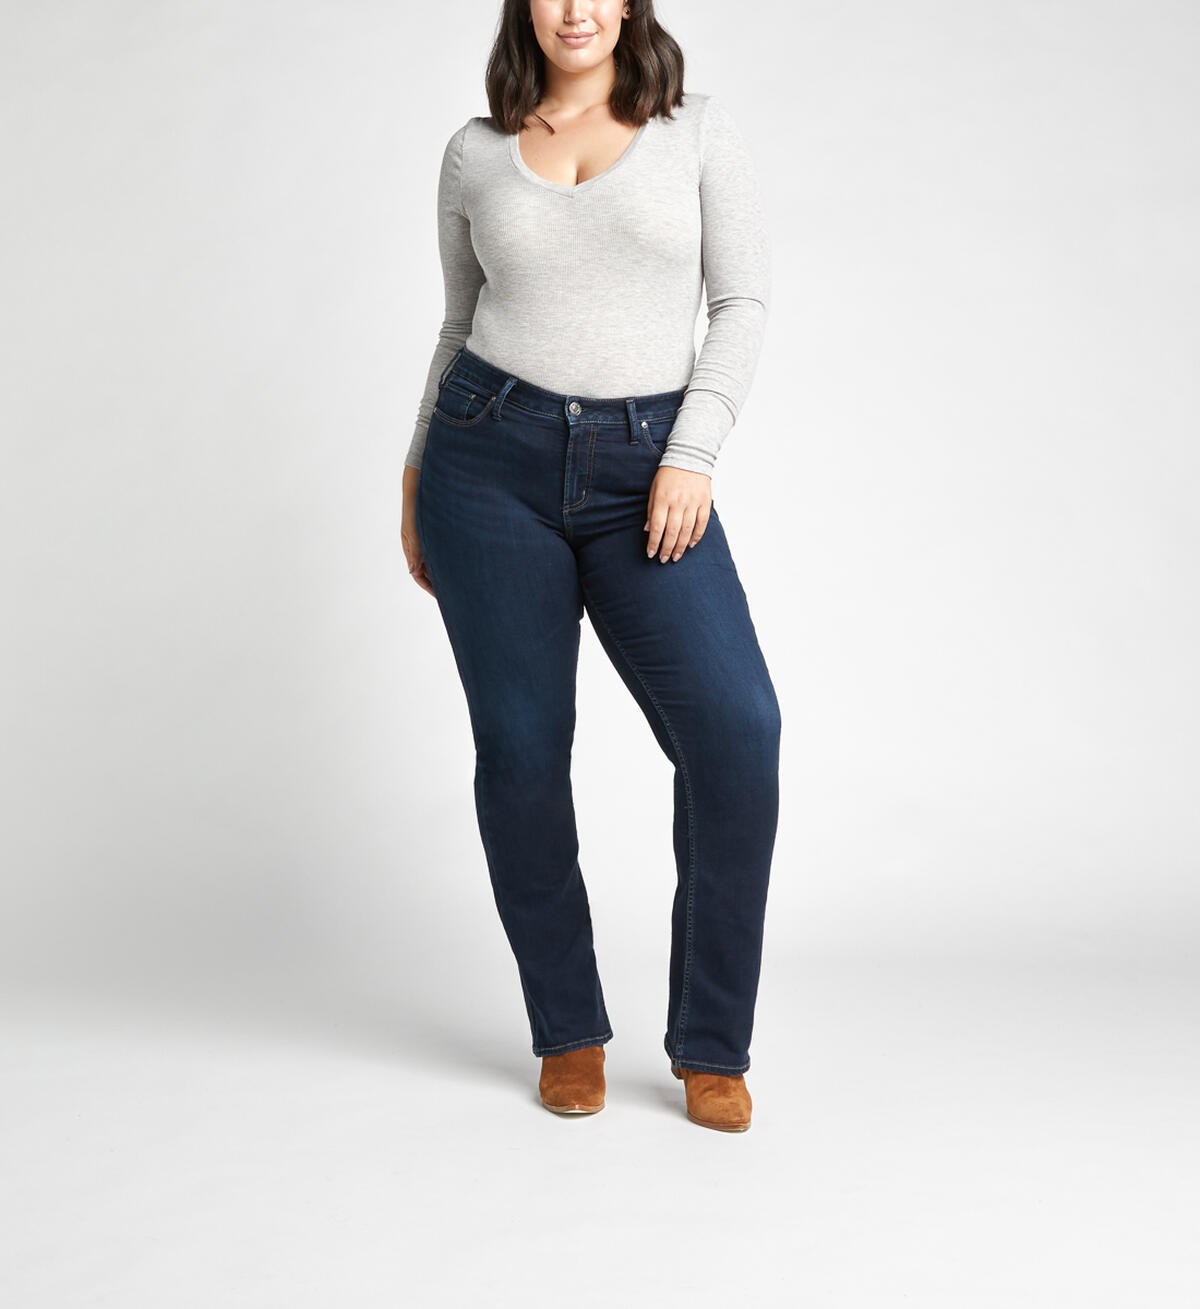 Avery High Rise Slim Bootcut Jeans Plus Size, Indigo, hi-res image number 3